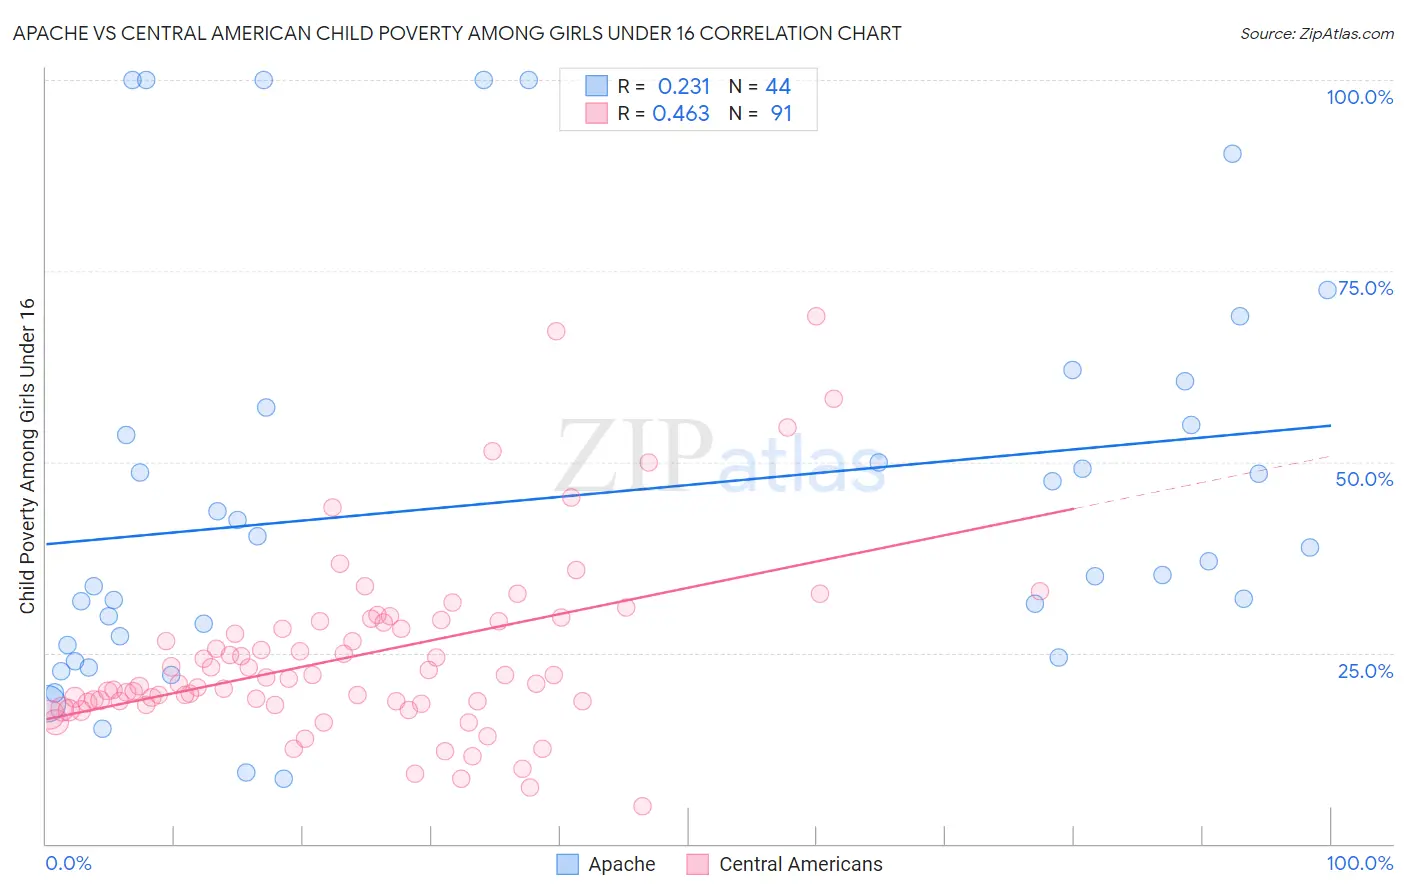 Apache vs Central American Child Poverty Among Girls Under 16